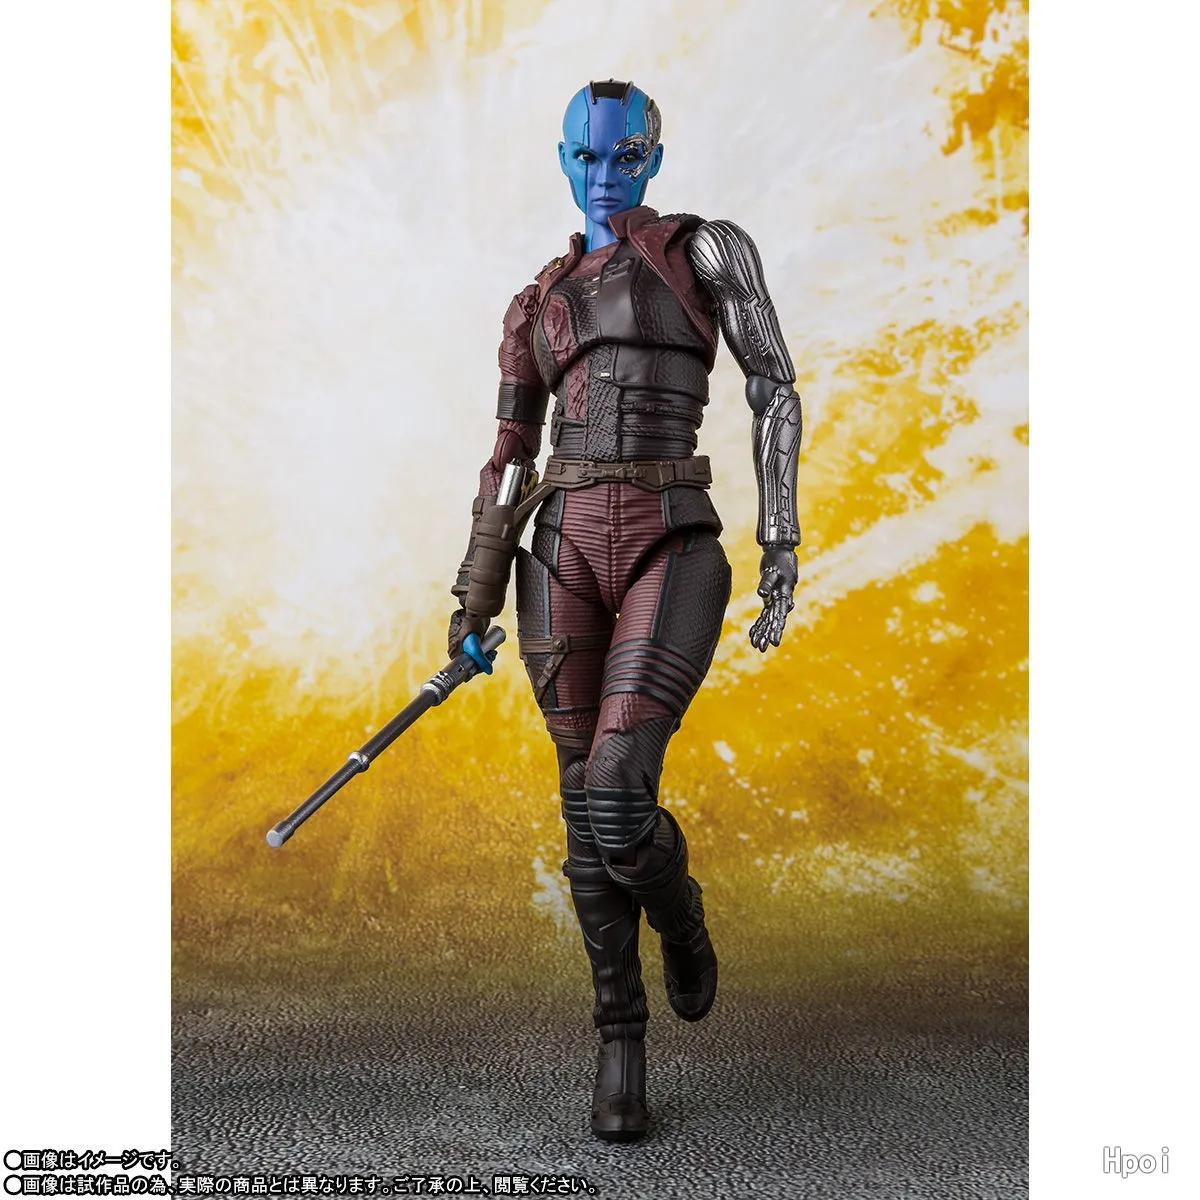 

Original Bandai Nebula Action Figure Shf Figure Guardians Of The Galaxy The Avengers Marvel Toy Kids Gift In Stock